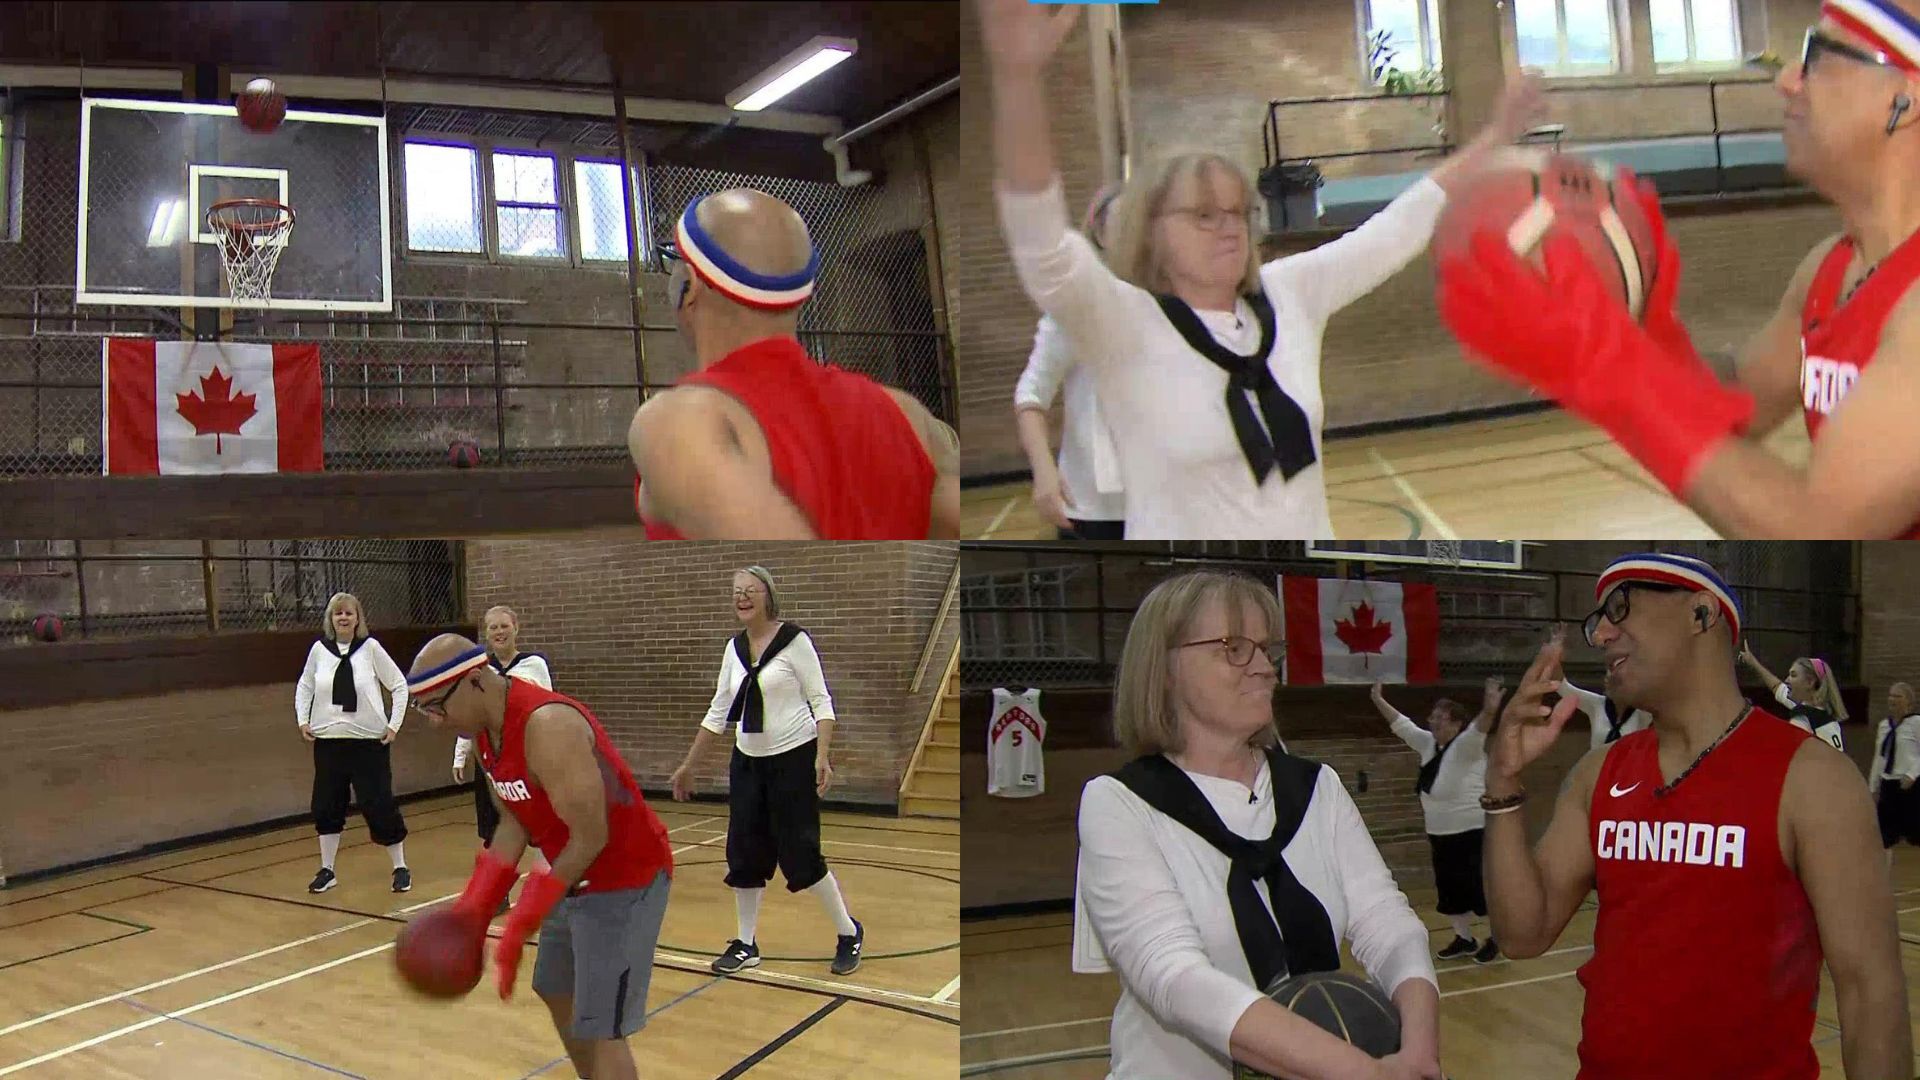 This granny basketball team's spirit is unmatched